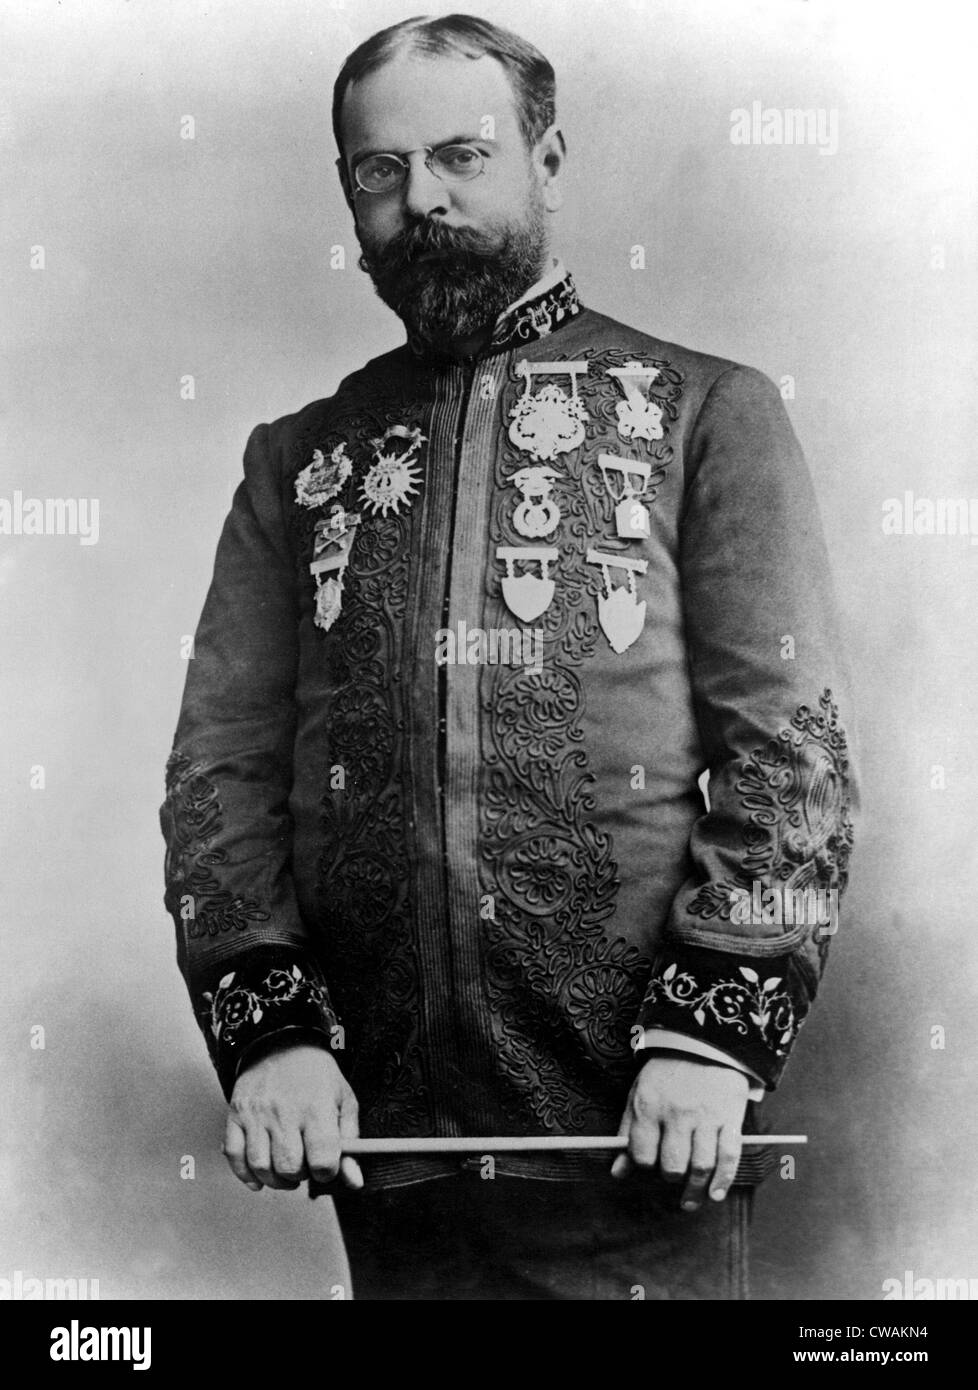 John Philip Sousa High Resolution Stock Photography and Images - Alamy